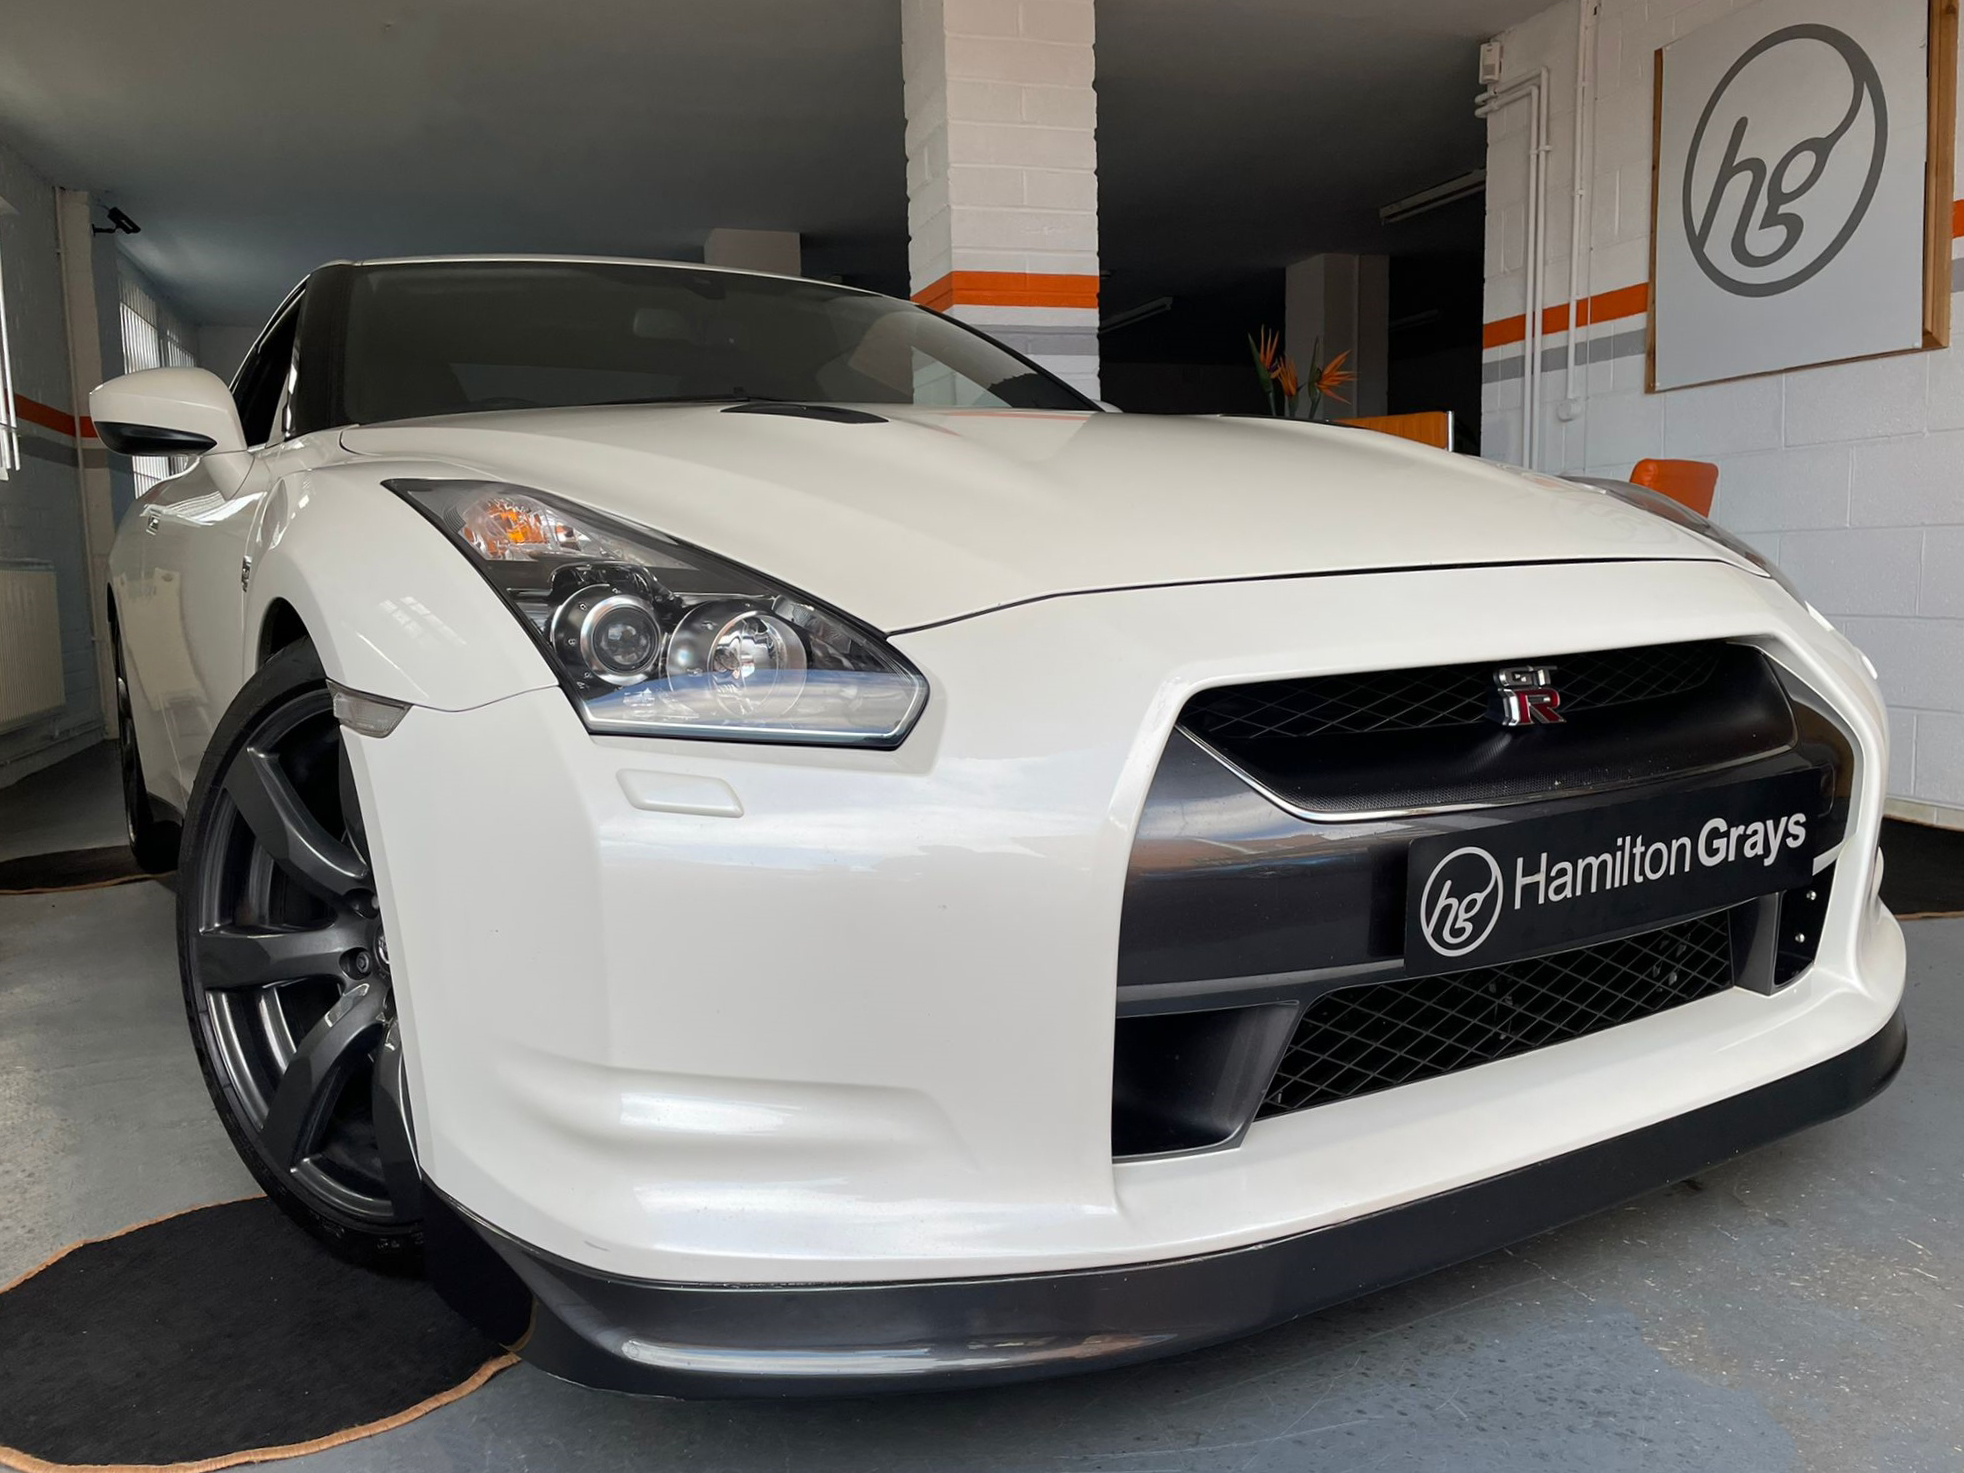 2010 (60) Nissan GT-R 3.8 V6 Premium [JMI 1100R] Auto. In Pearl White with Black / Red Leather. 64k.. Full JMI Build @ 56k / 1,070 bhp.. Fully Documented. Tracker Fitted. £64,950